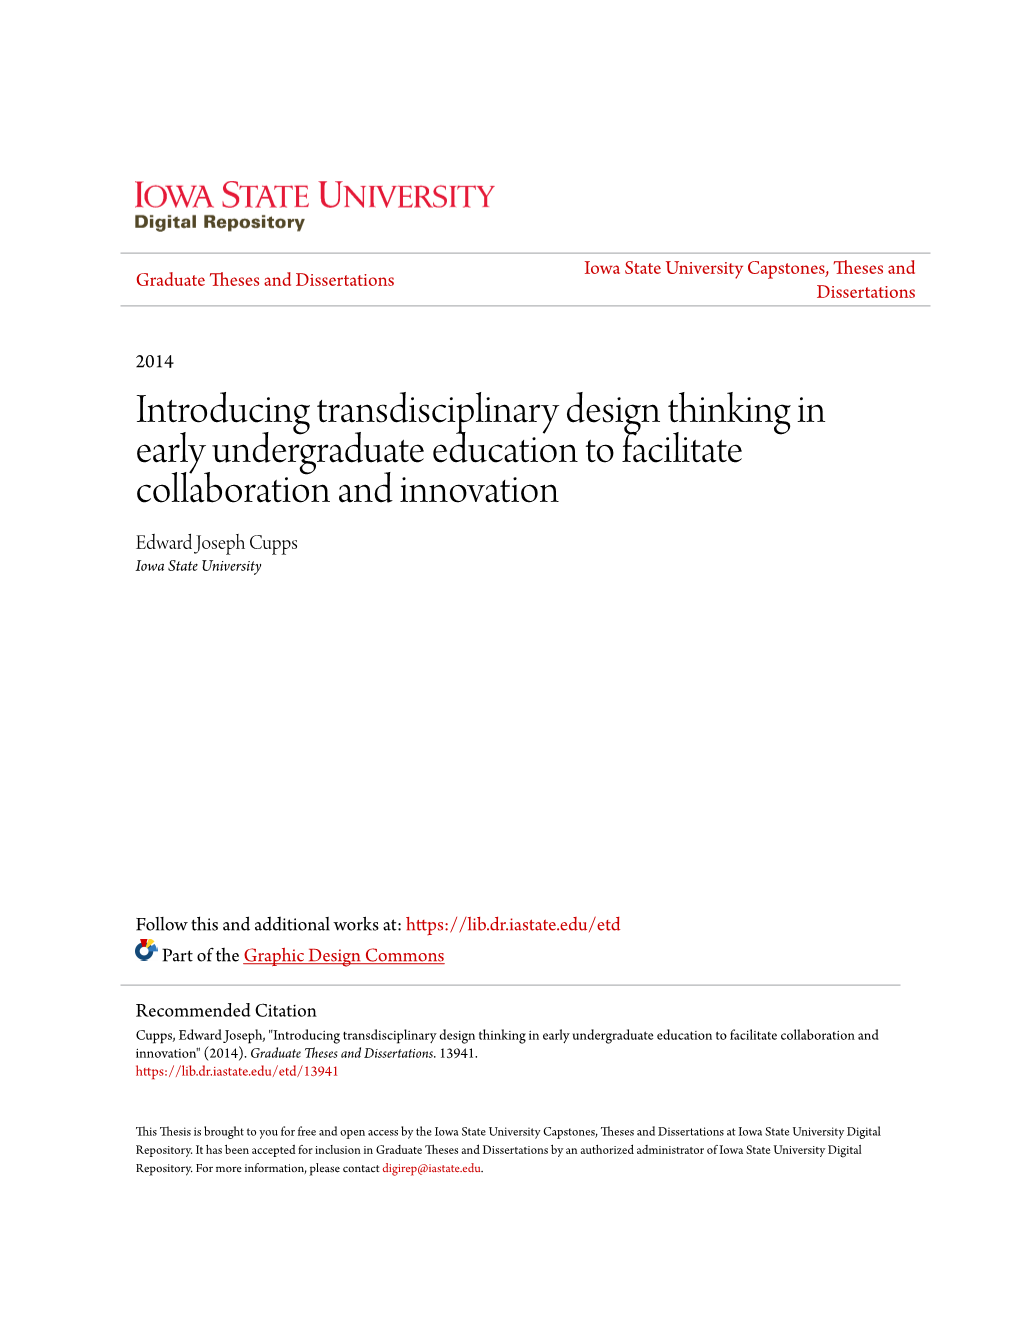 Introducing Transdisciplinary Design Thinking in Early Undergraduate Education to Facilitate Collaboration and Innovation Edward Joseph Cupps Iowa State University